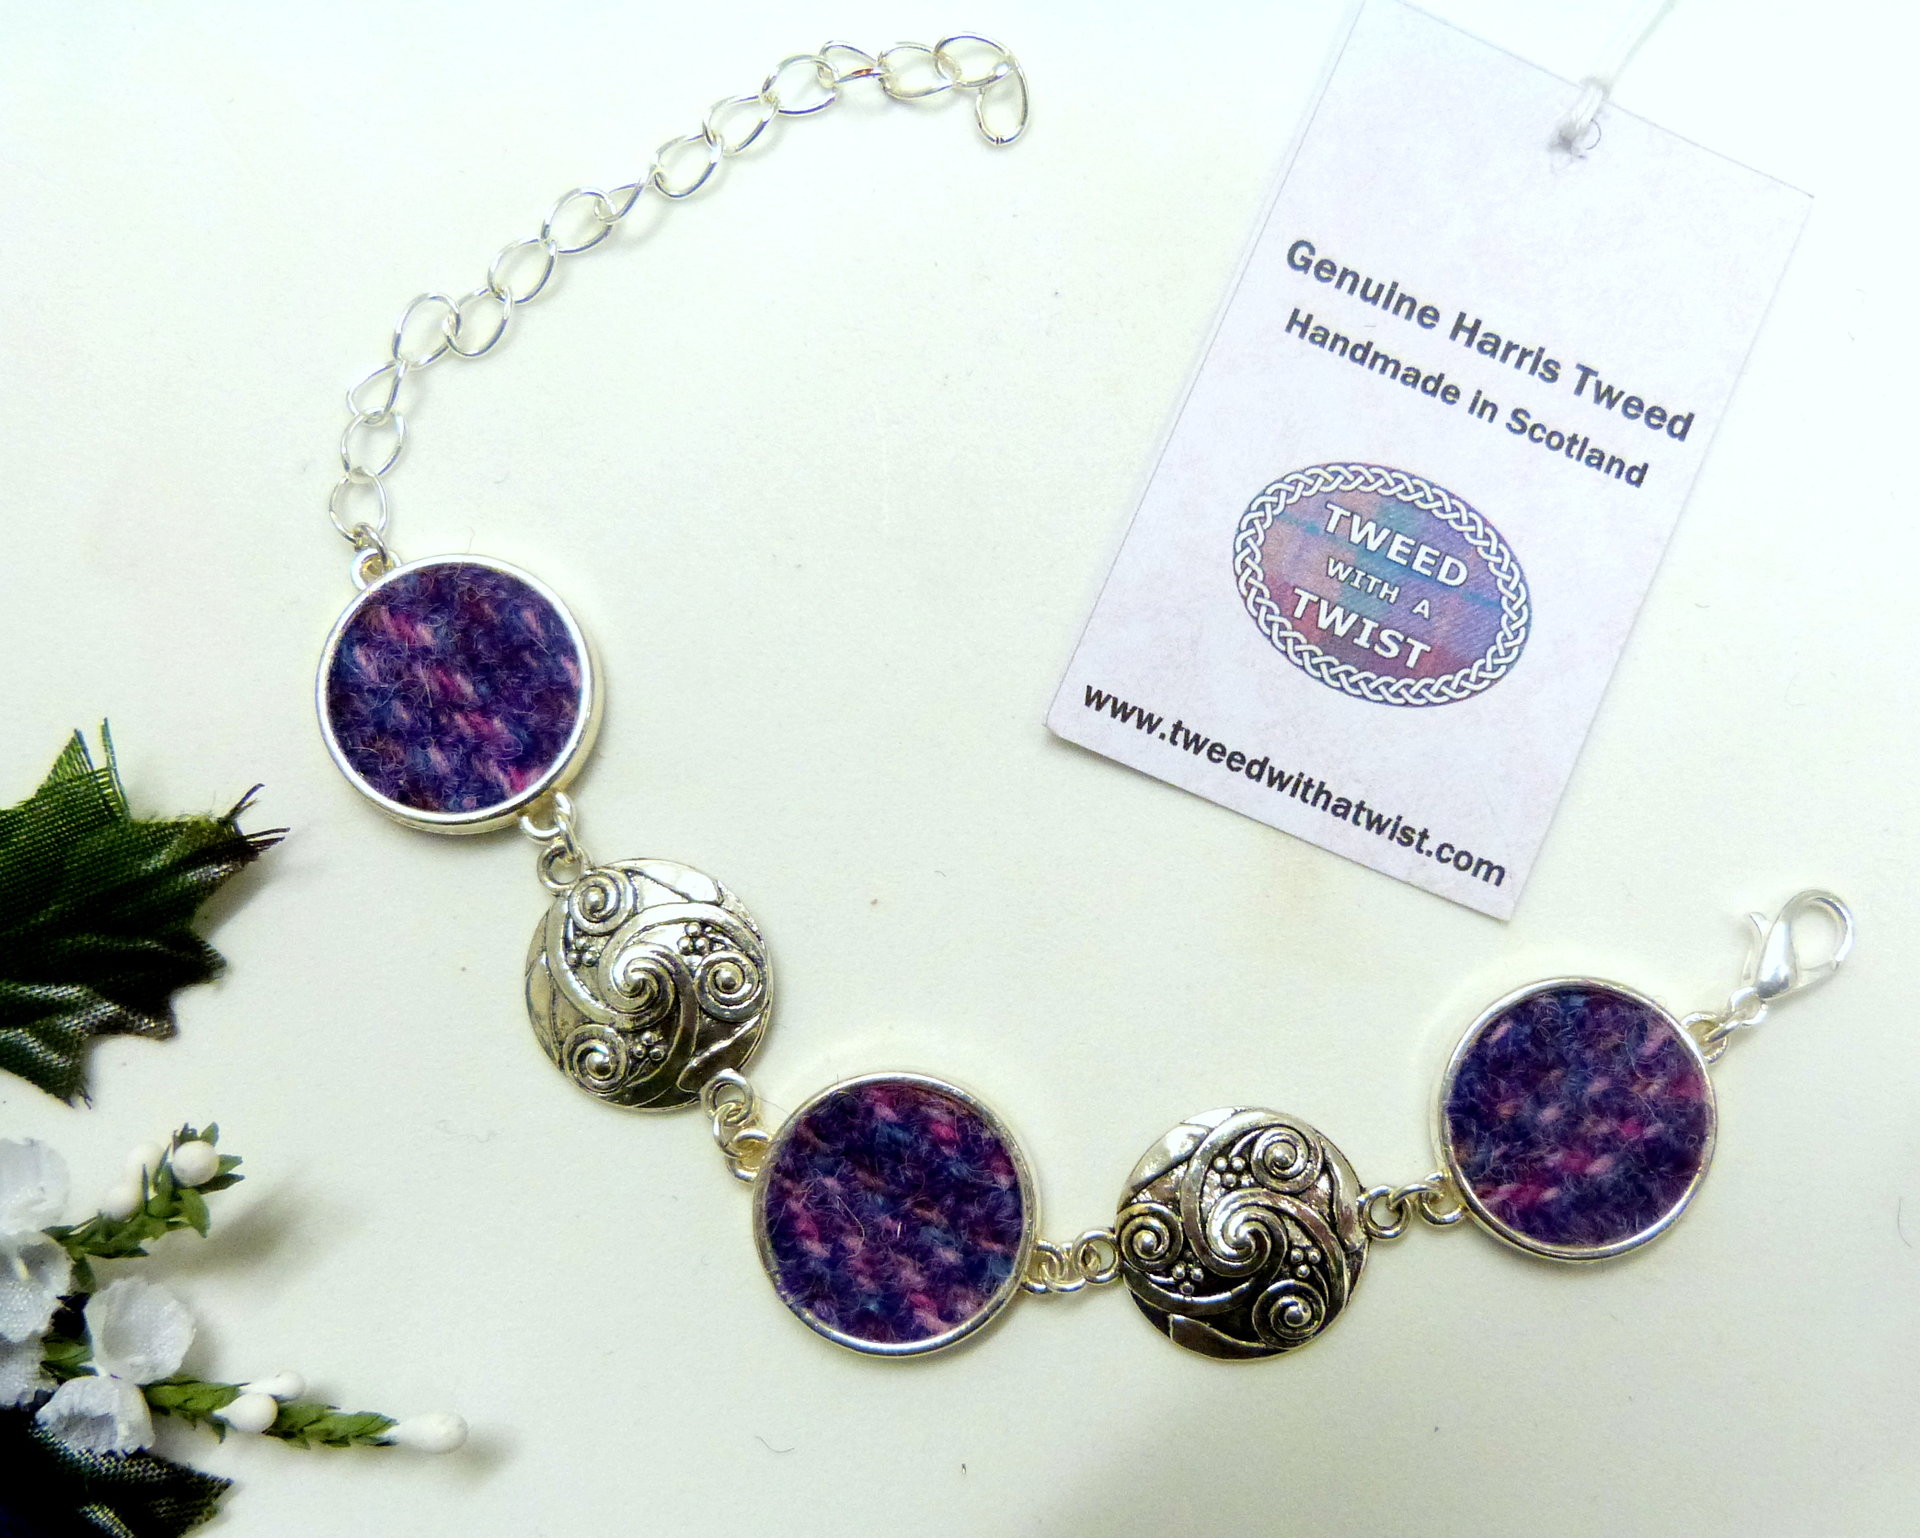 Bracelet with celtic spiral in Purple and pink Kaona Harris Tweed womens jewellery gift for mother, bridesmaid  or christmas present